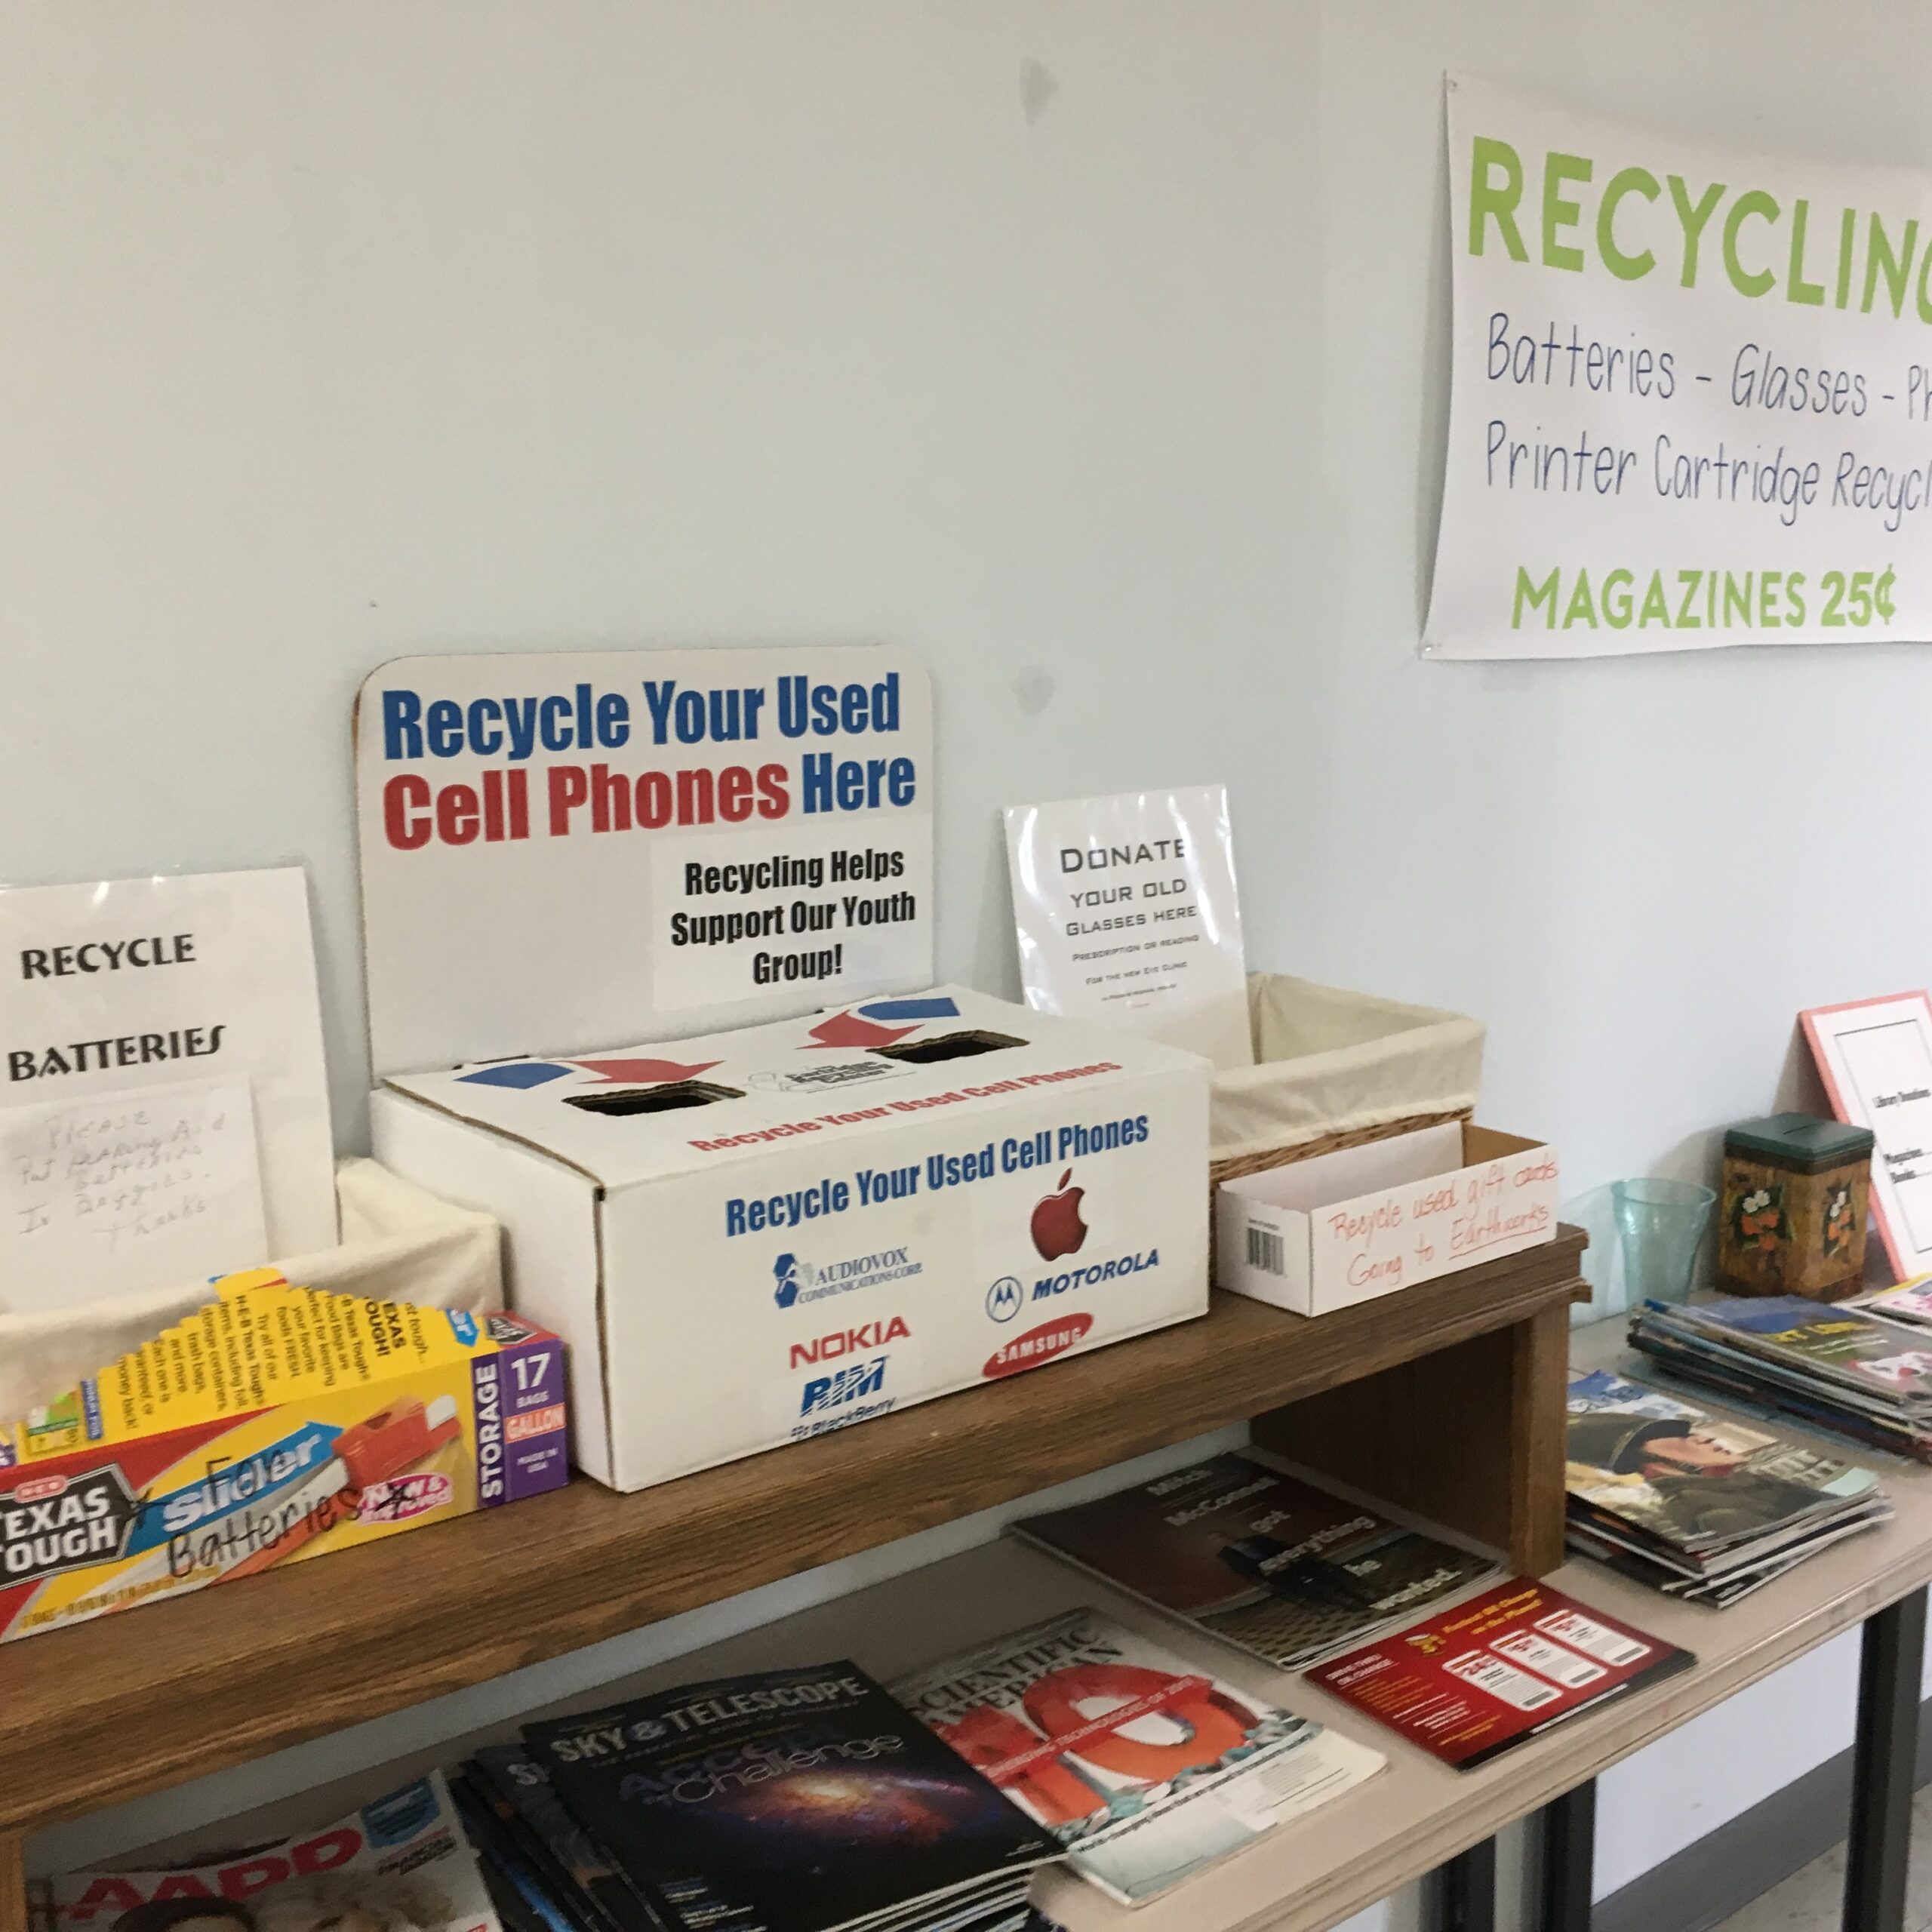 Recycling opportunities with Earth Covenant Ministry